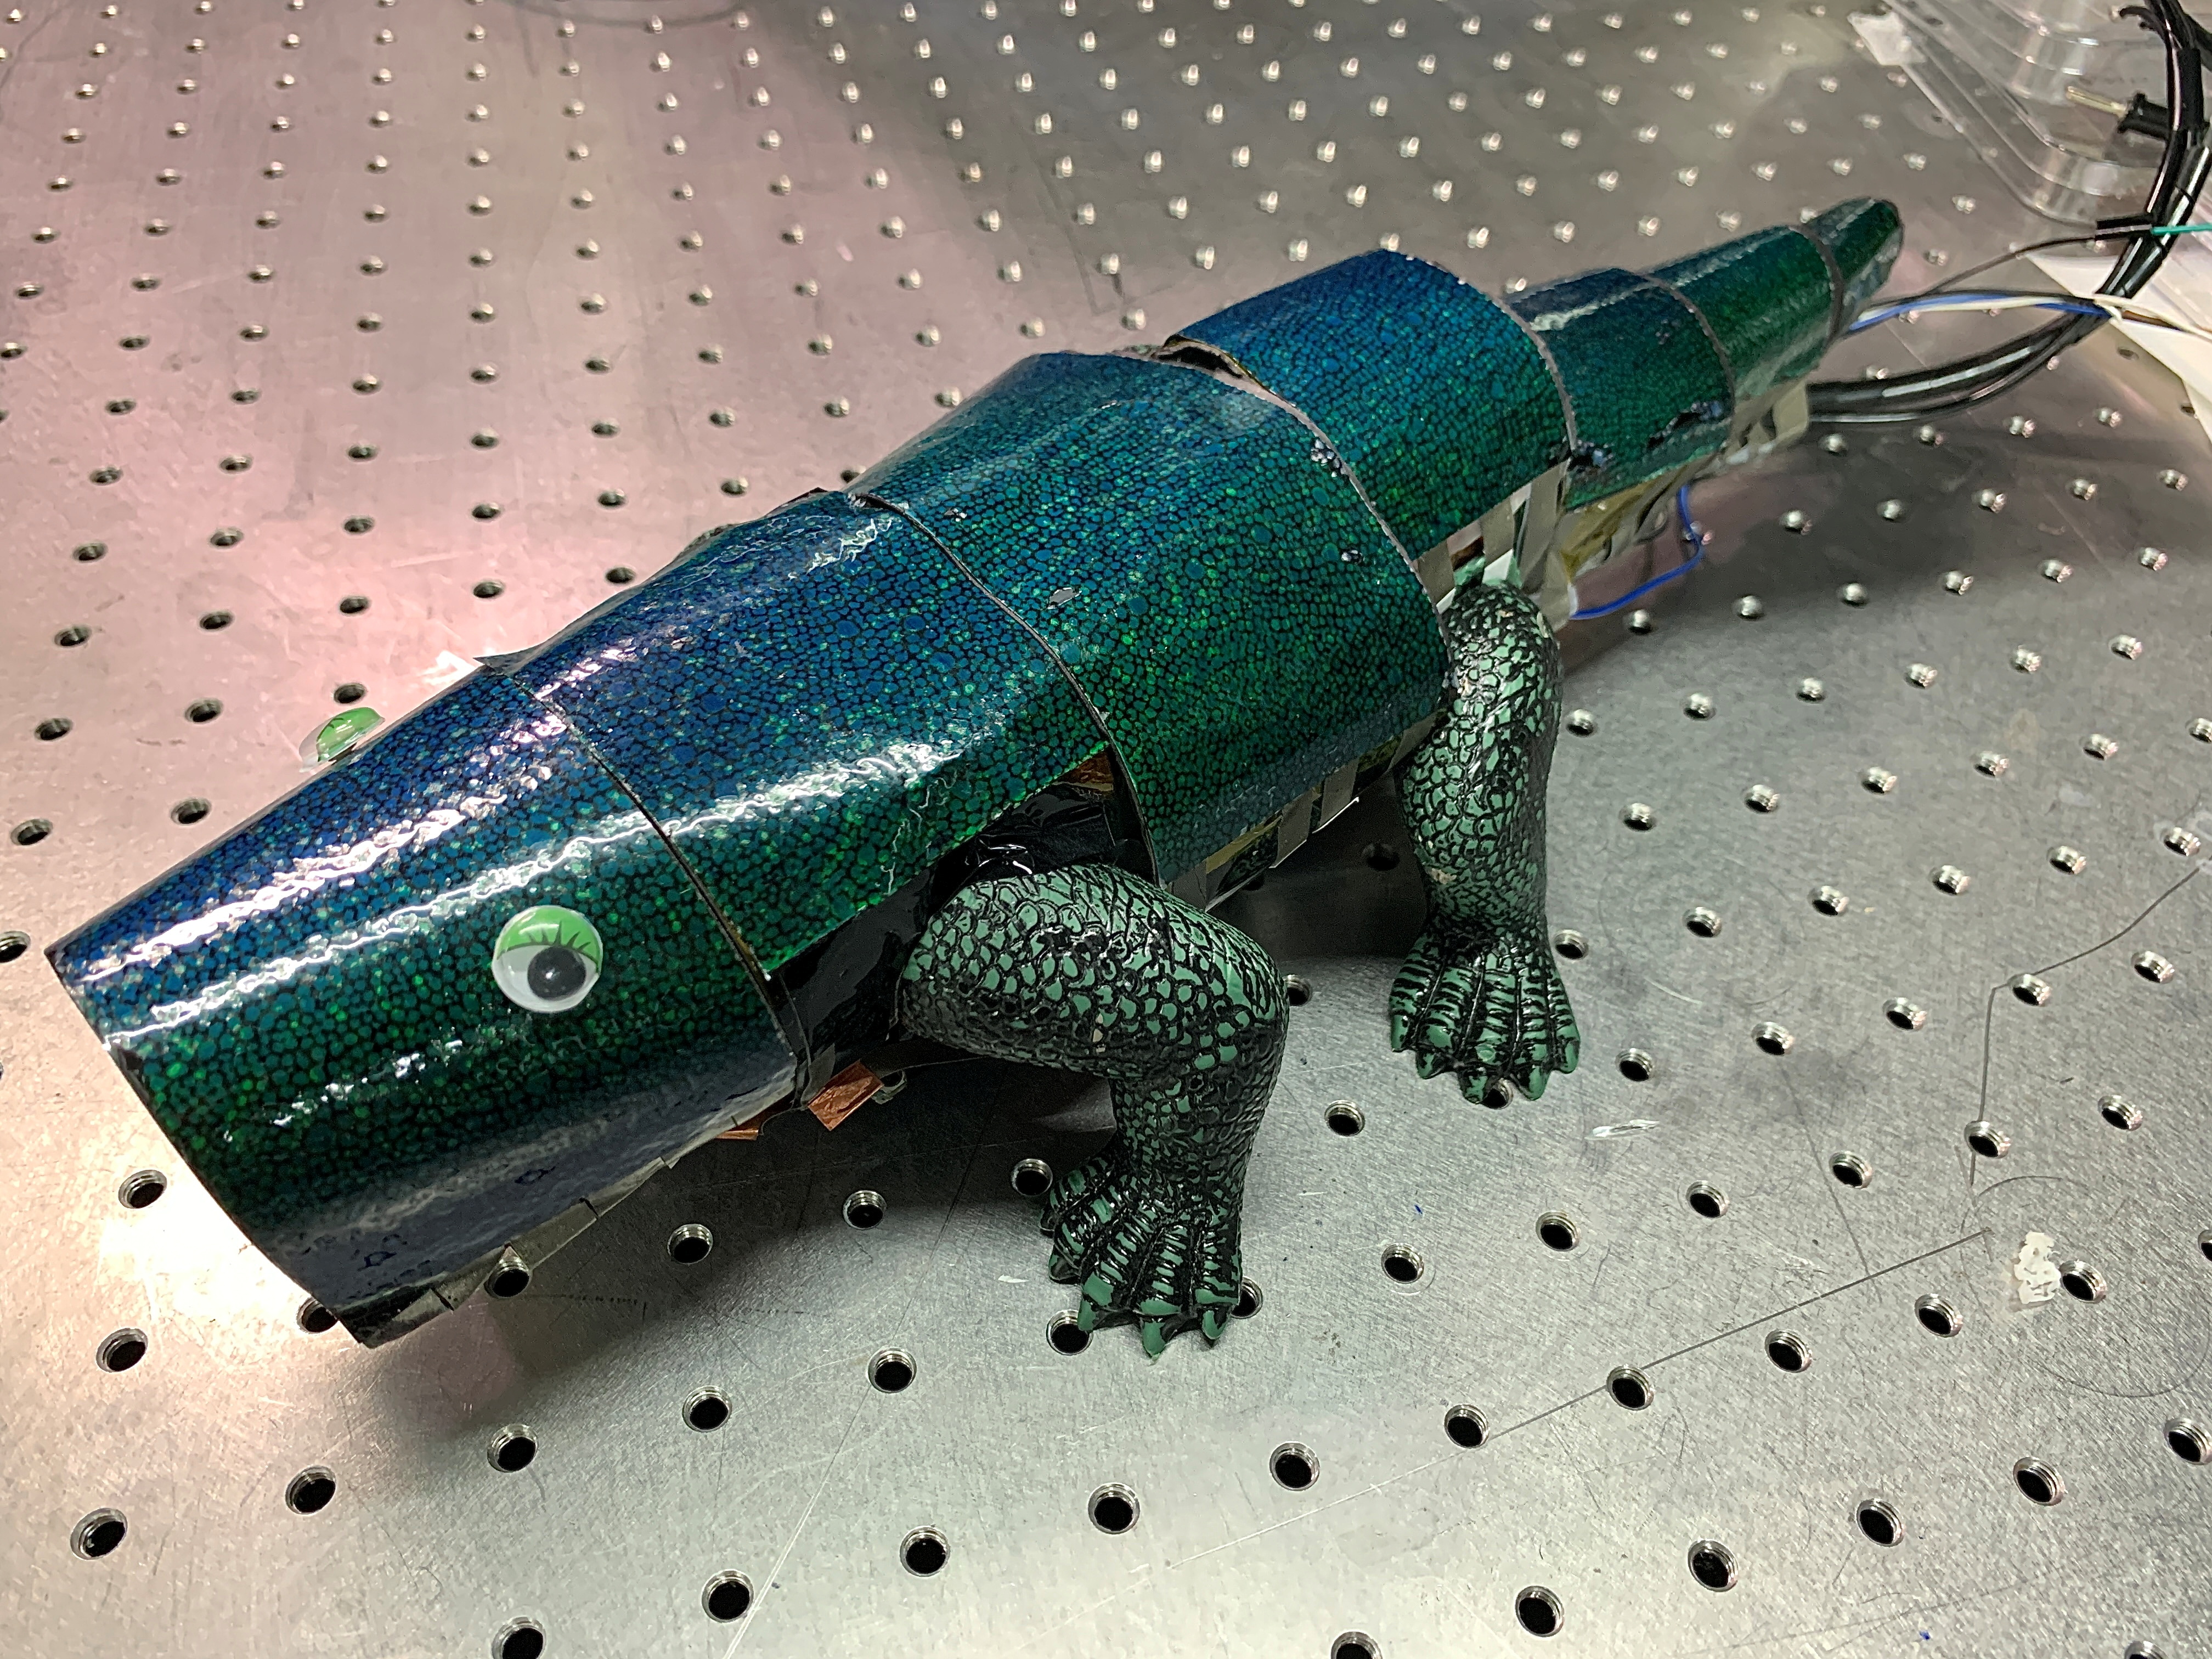 Chameleon robot covered with artificial skin that can change its colour based on surroundings, is seen in Seoul